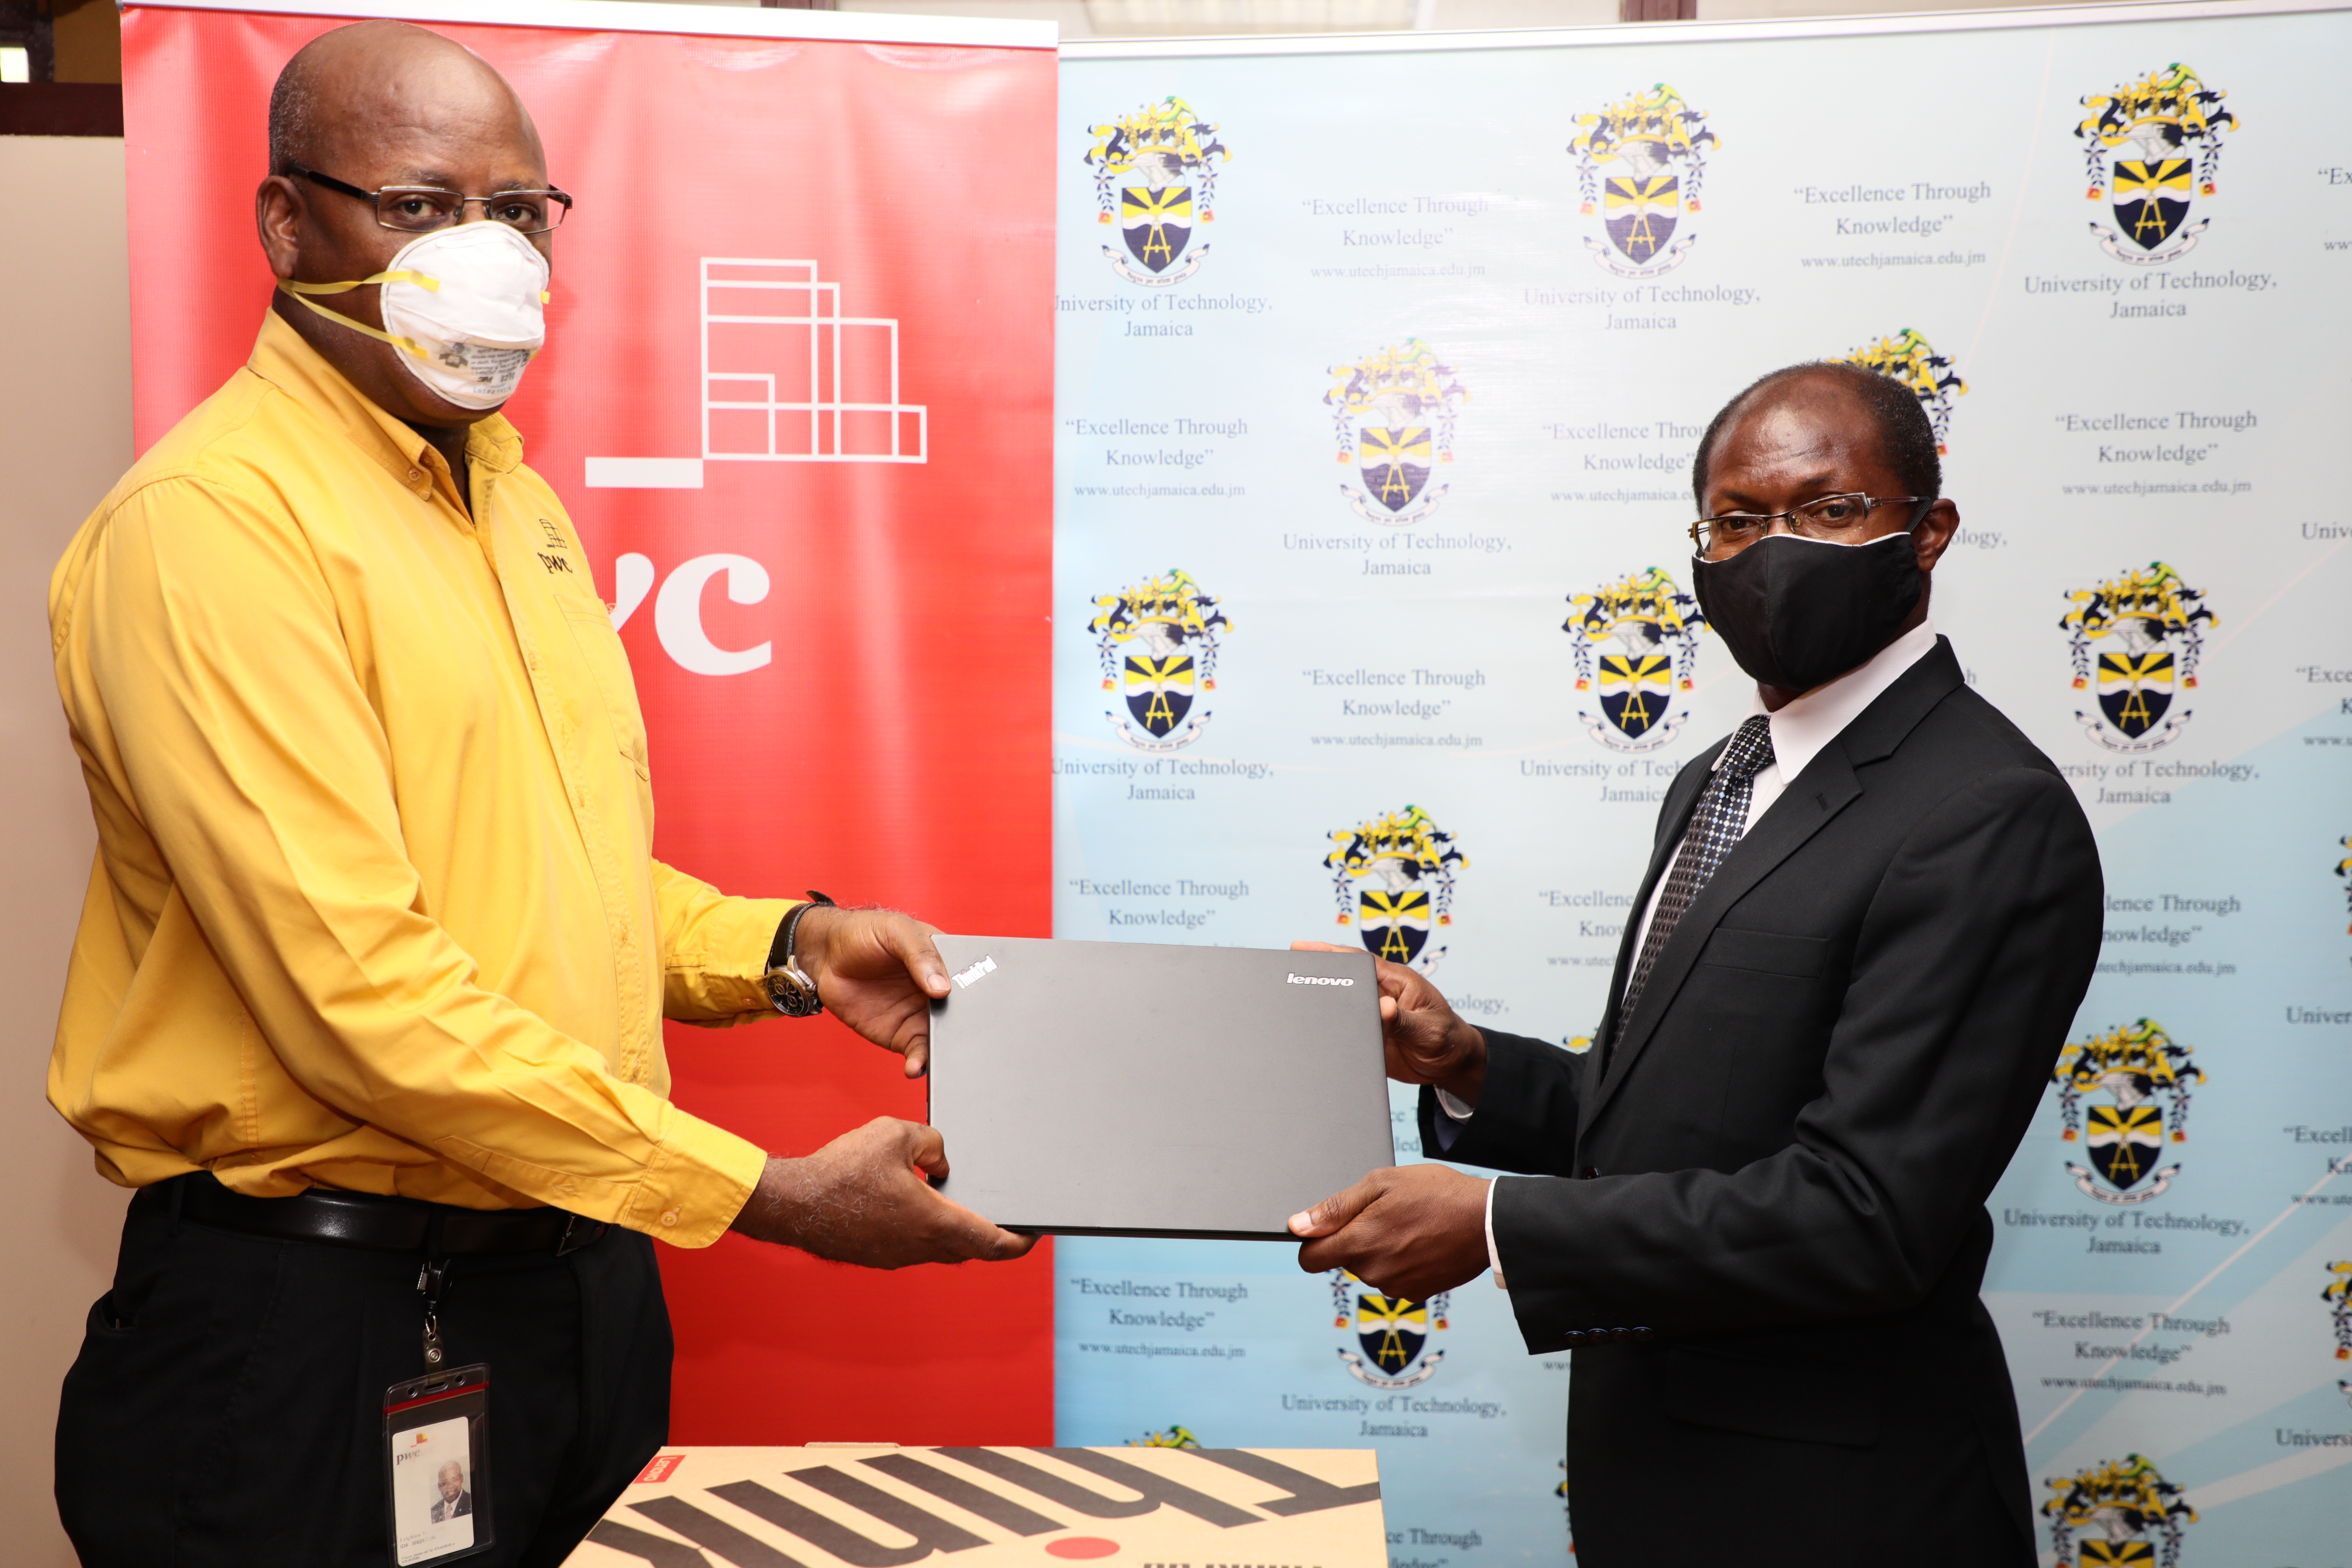  PricewaterhouseCoopers Donates Laptops to Support Students in Need